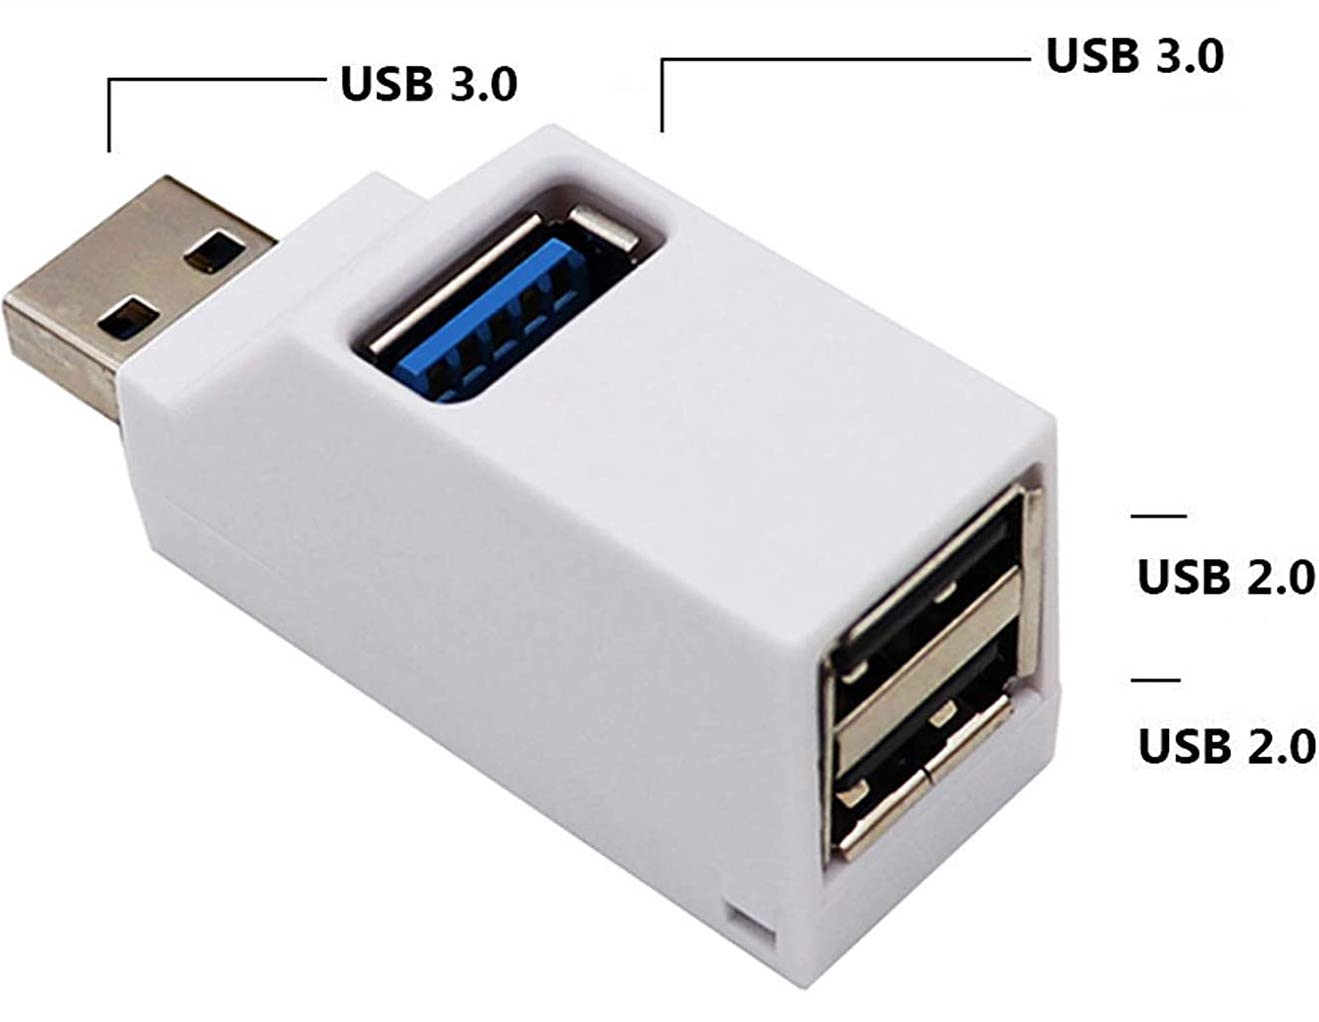 An extremely janky USB hub